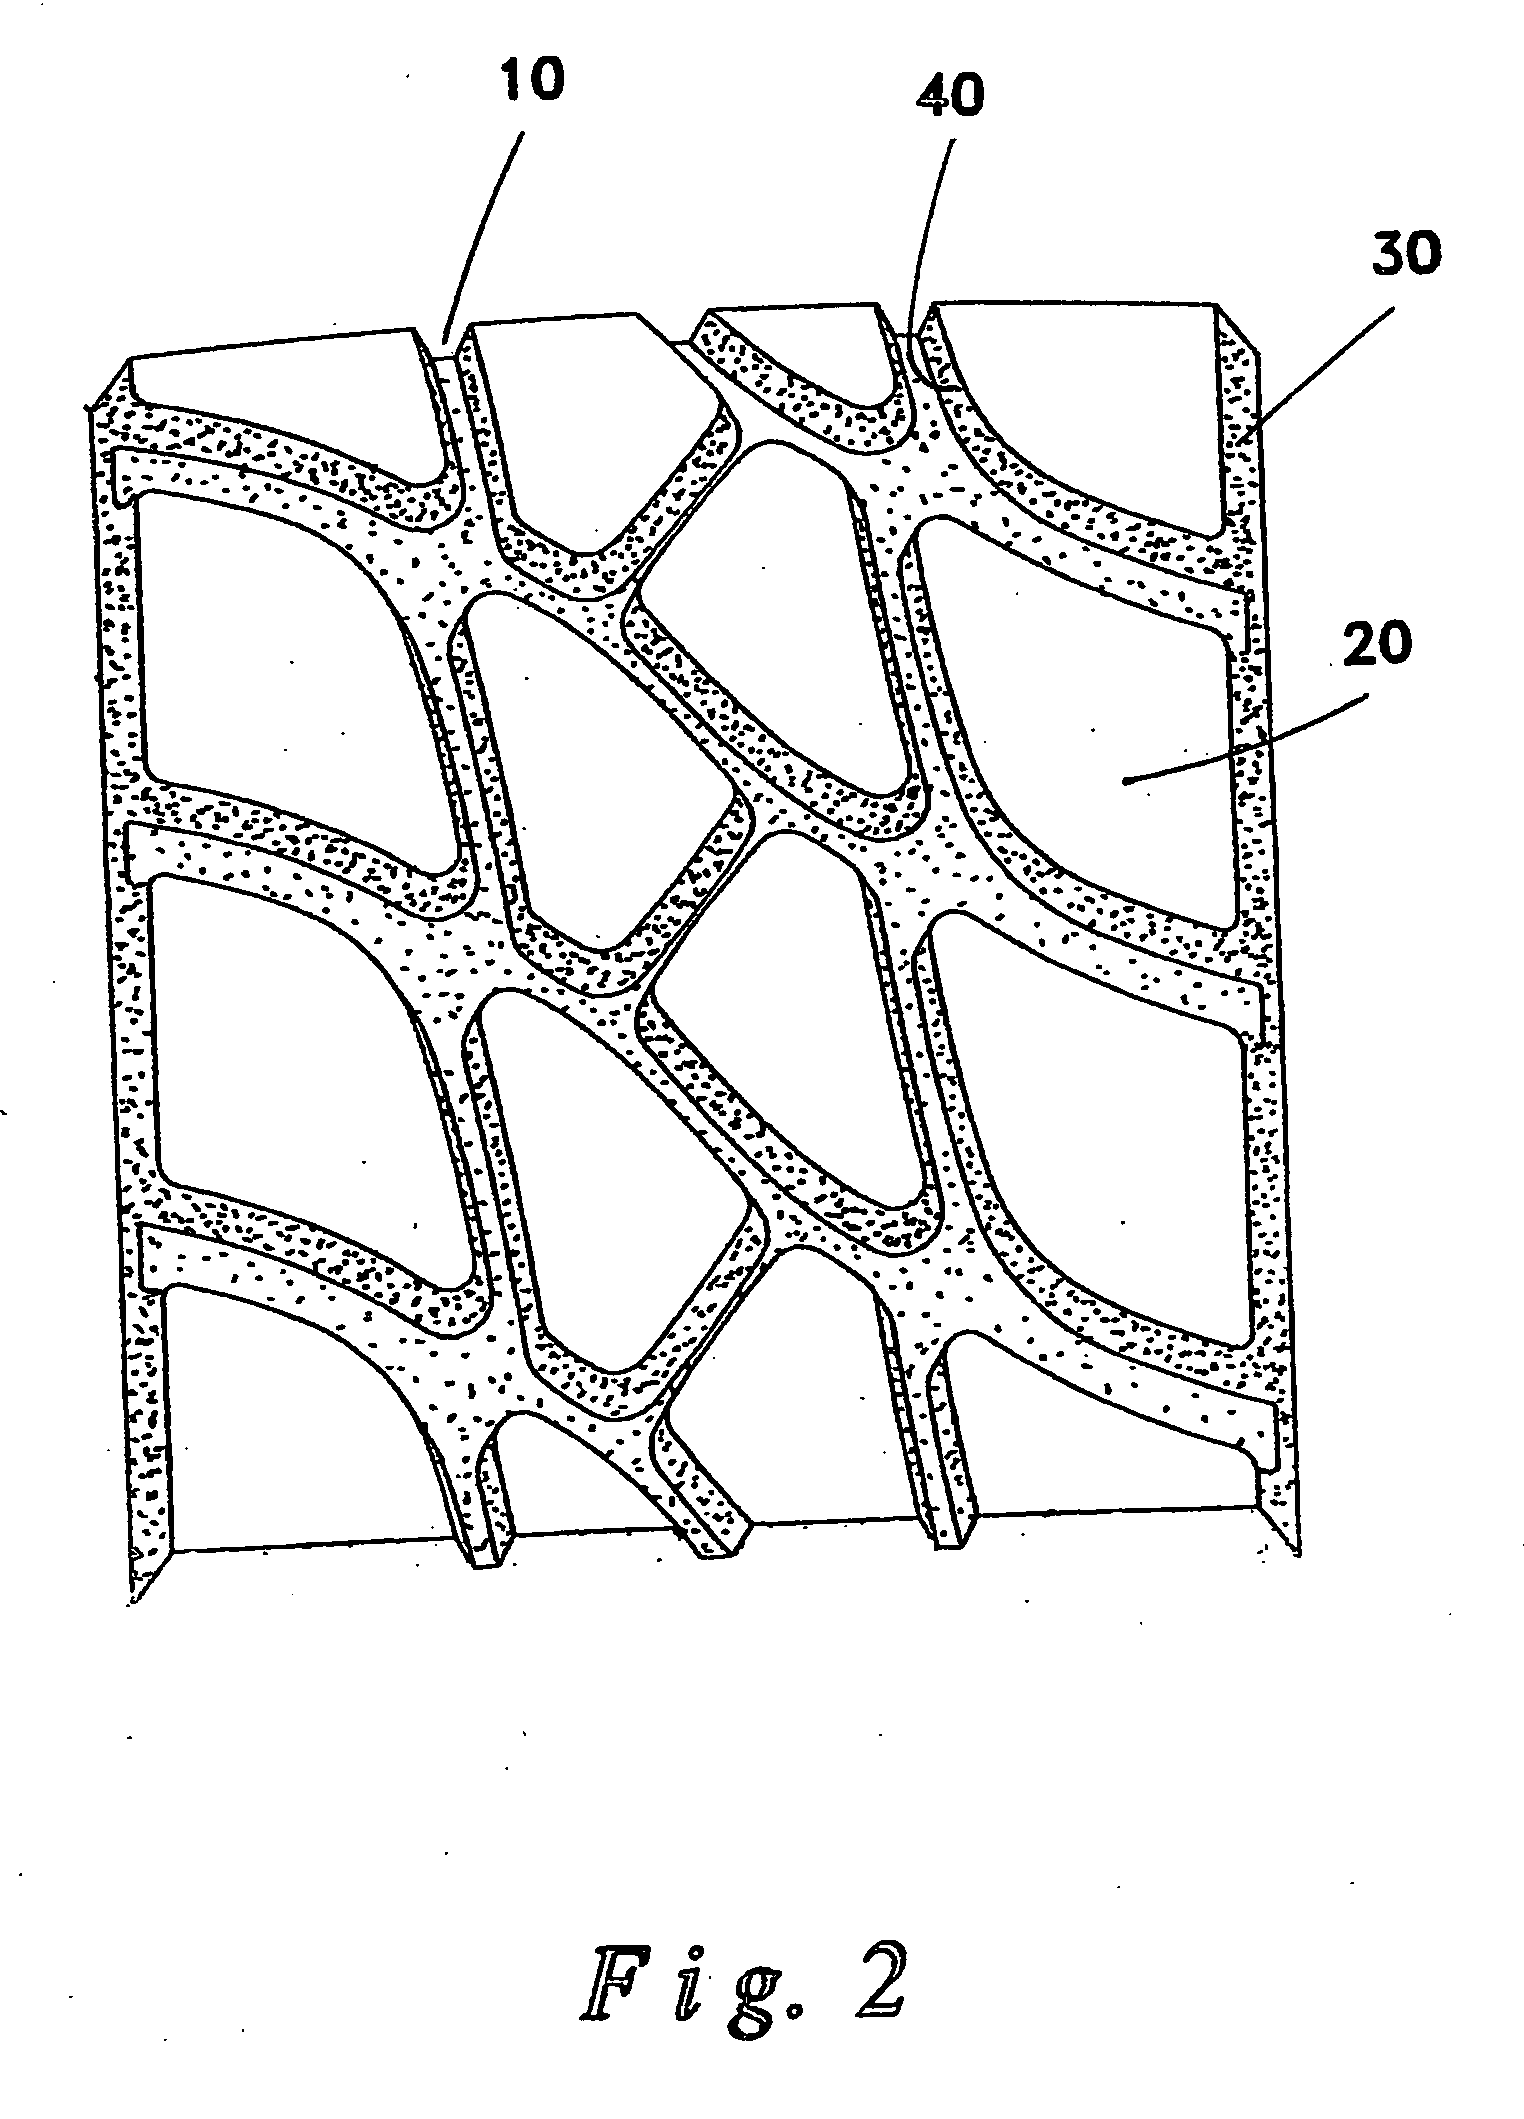 Method for curing a thick, non-uniform rubber article